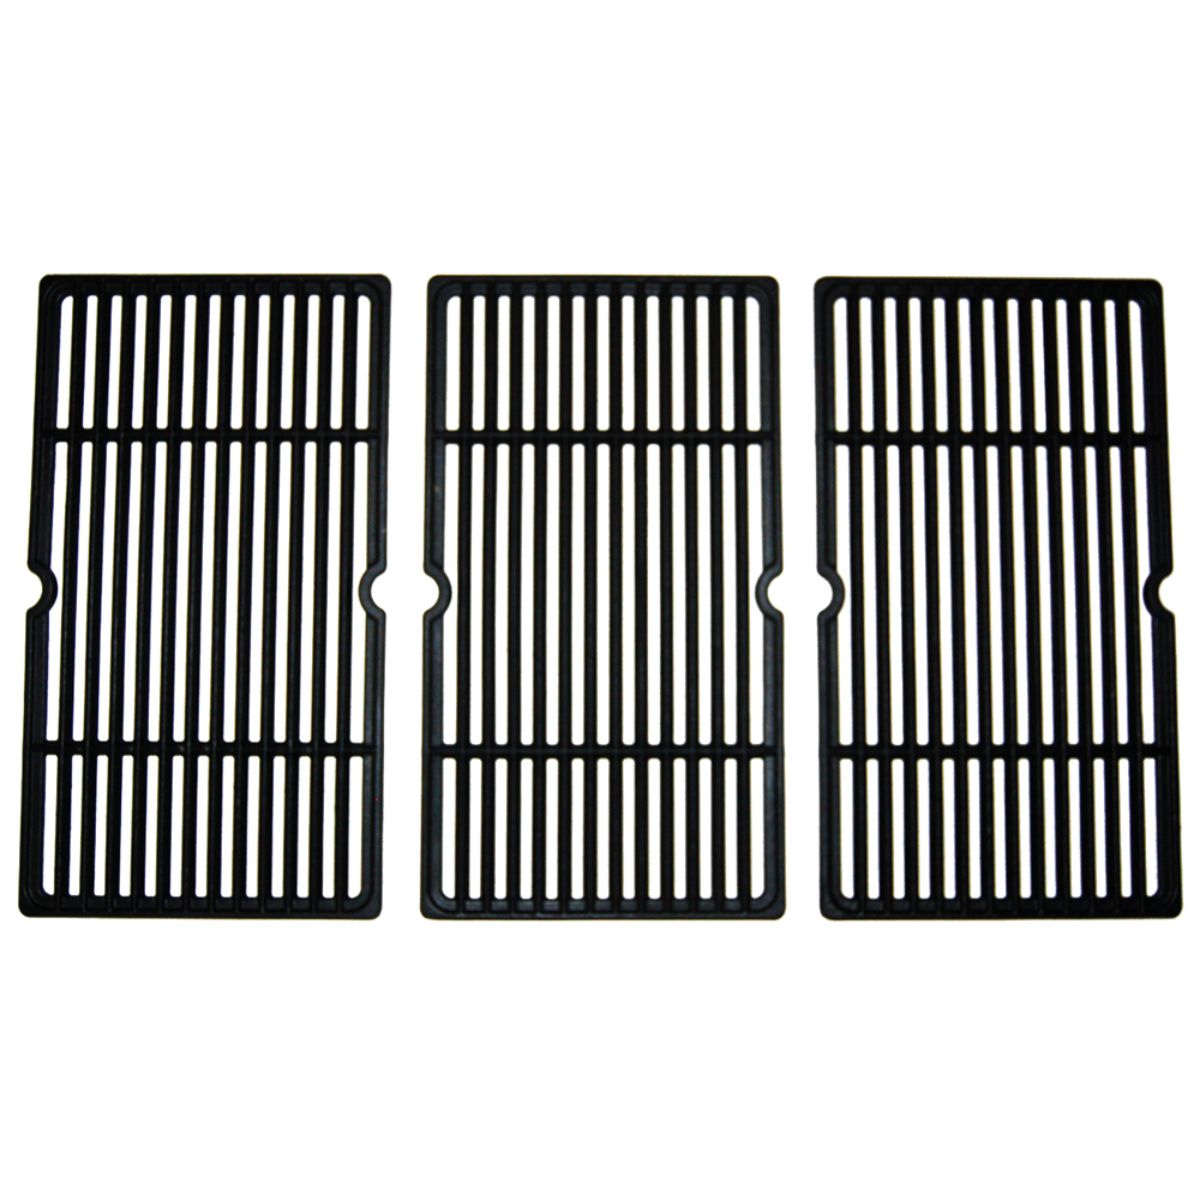 Contemporary Home Living Set of 3 Matte Cast Iron Cooking Grid for Charbroil Brand Gas Grills 30.5"